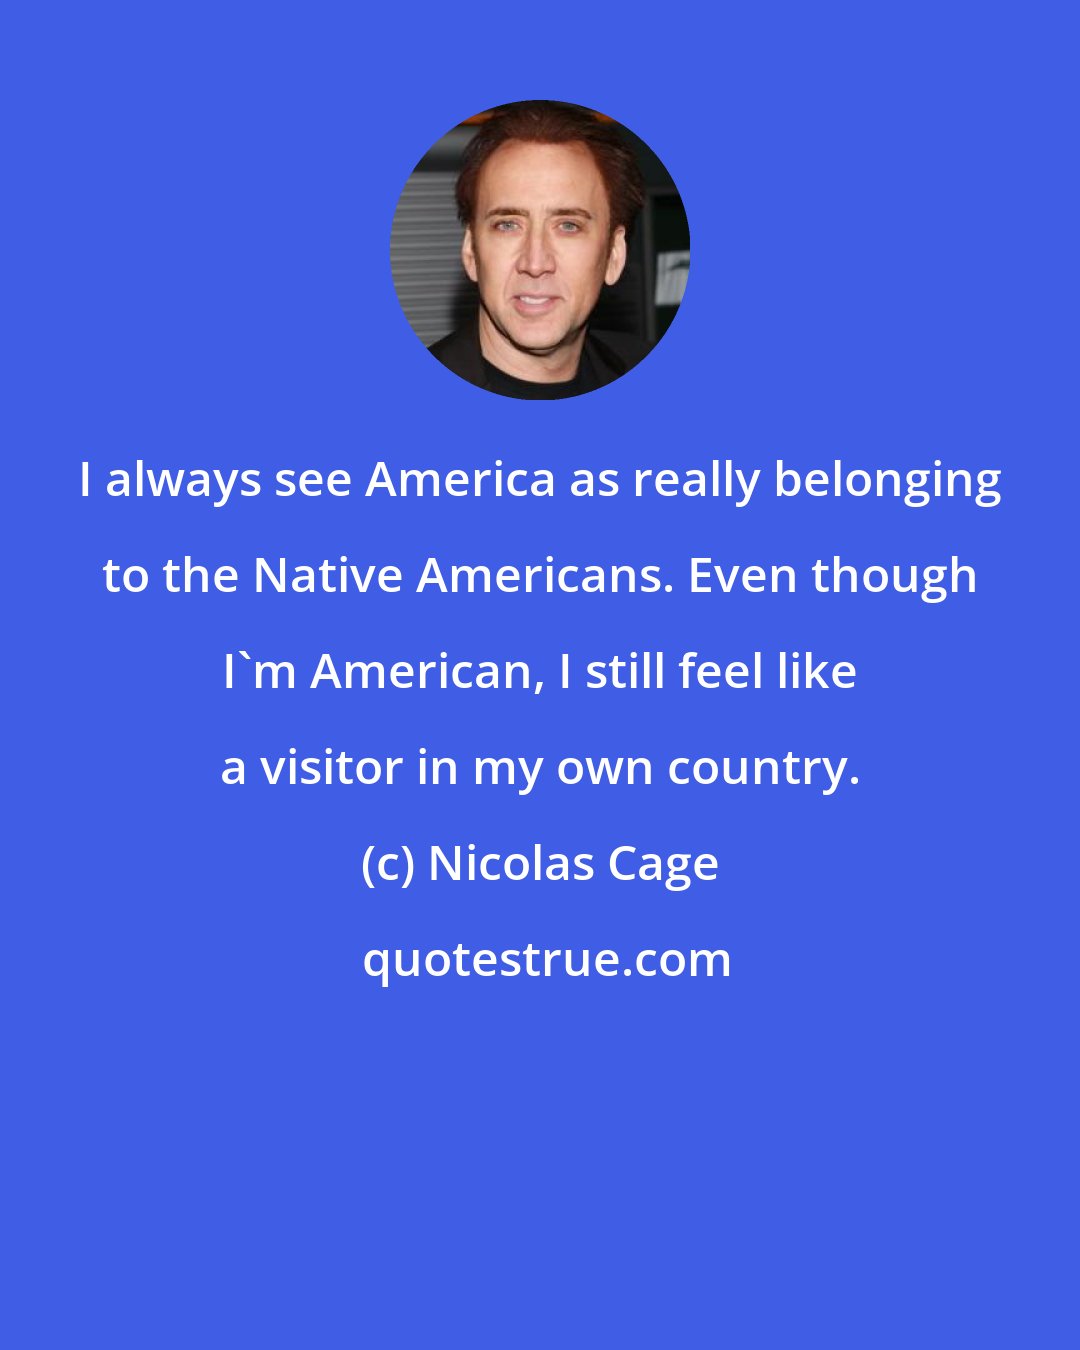 Nicolas Cage: I always see America as really belonging to the Native Americans. Even though I'm American, I still feel like a visitor in my own country.